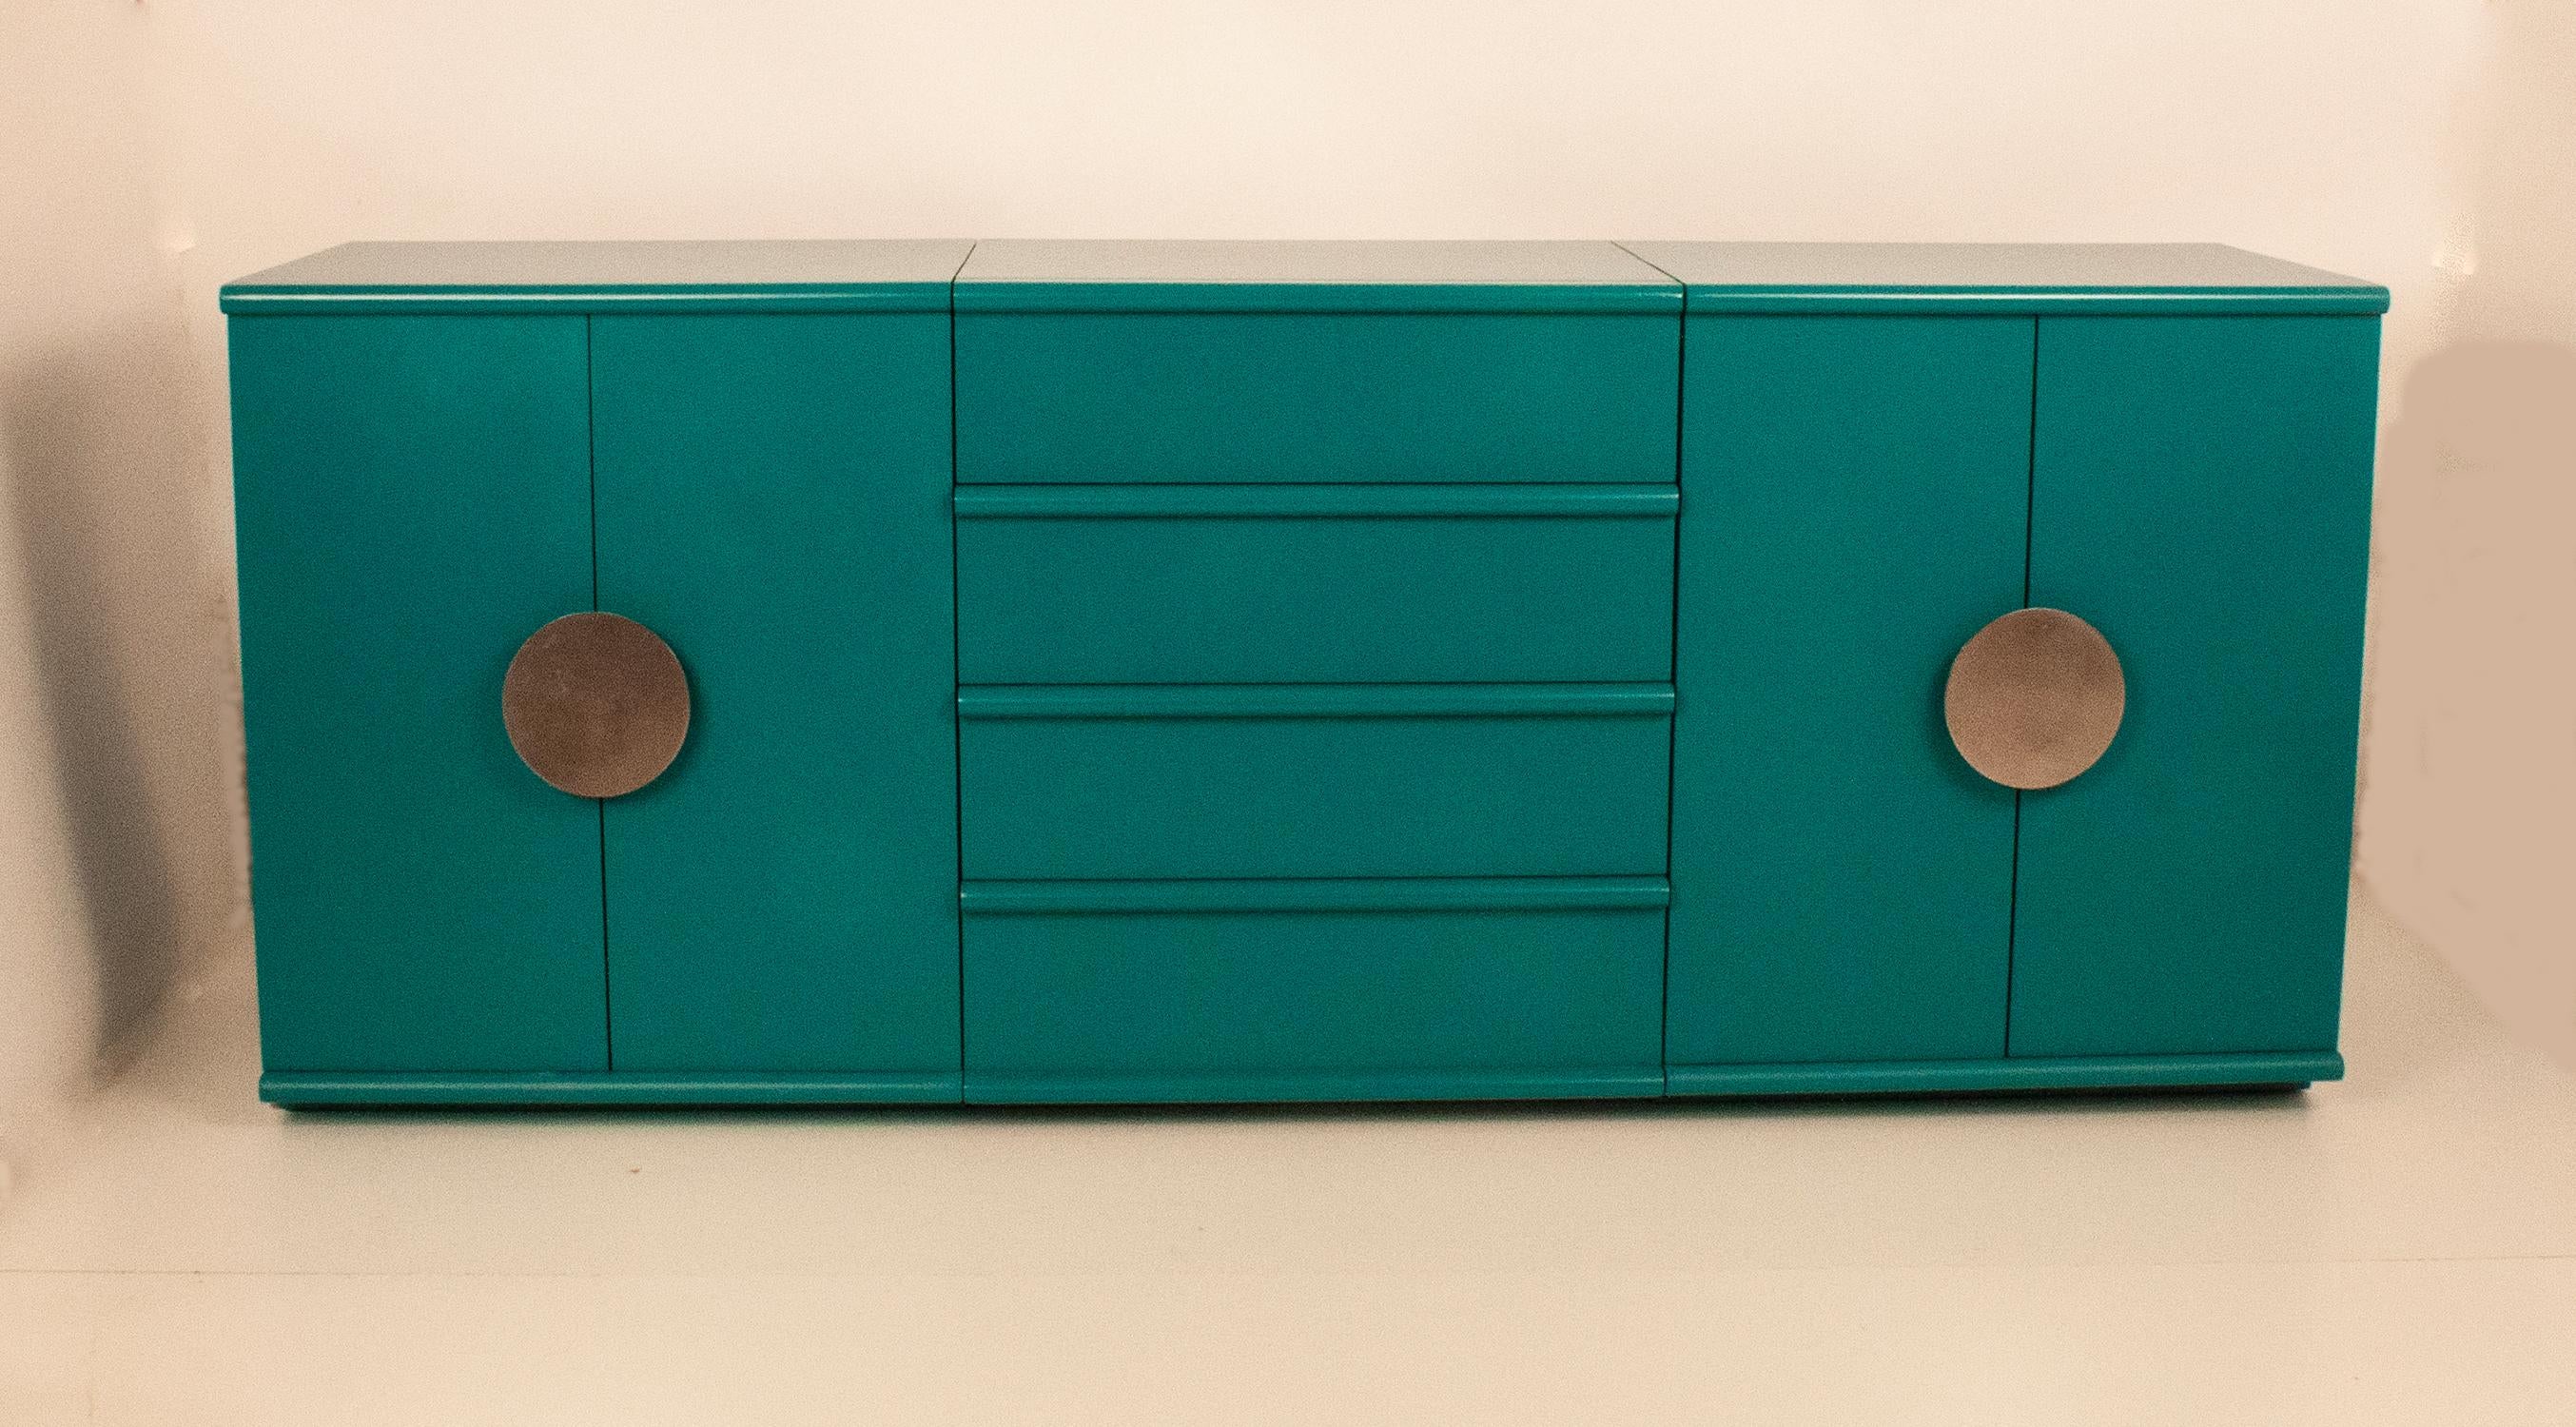 Sideboard designed in 1970's by Jordi Vilanova.
It was originally made of wood and is now lacquered in blue.
It consists of three modules, two of them with hinged doors and a shelf inside and another central module with four drawers.
Two circular